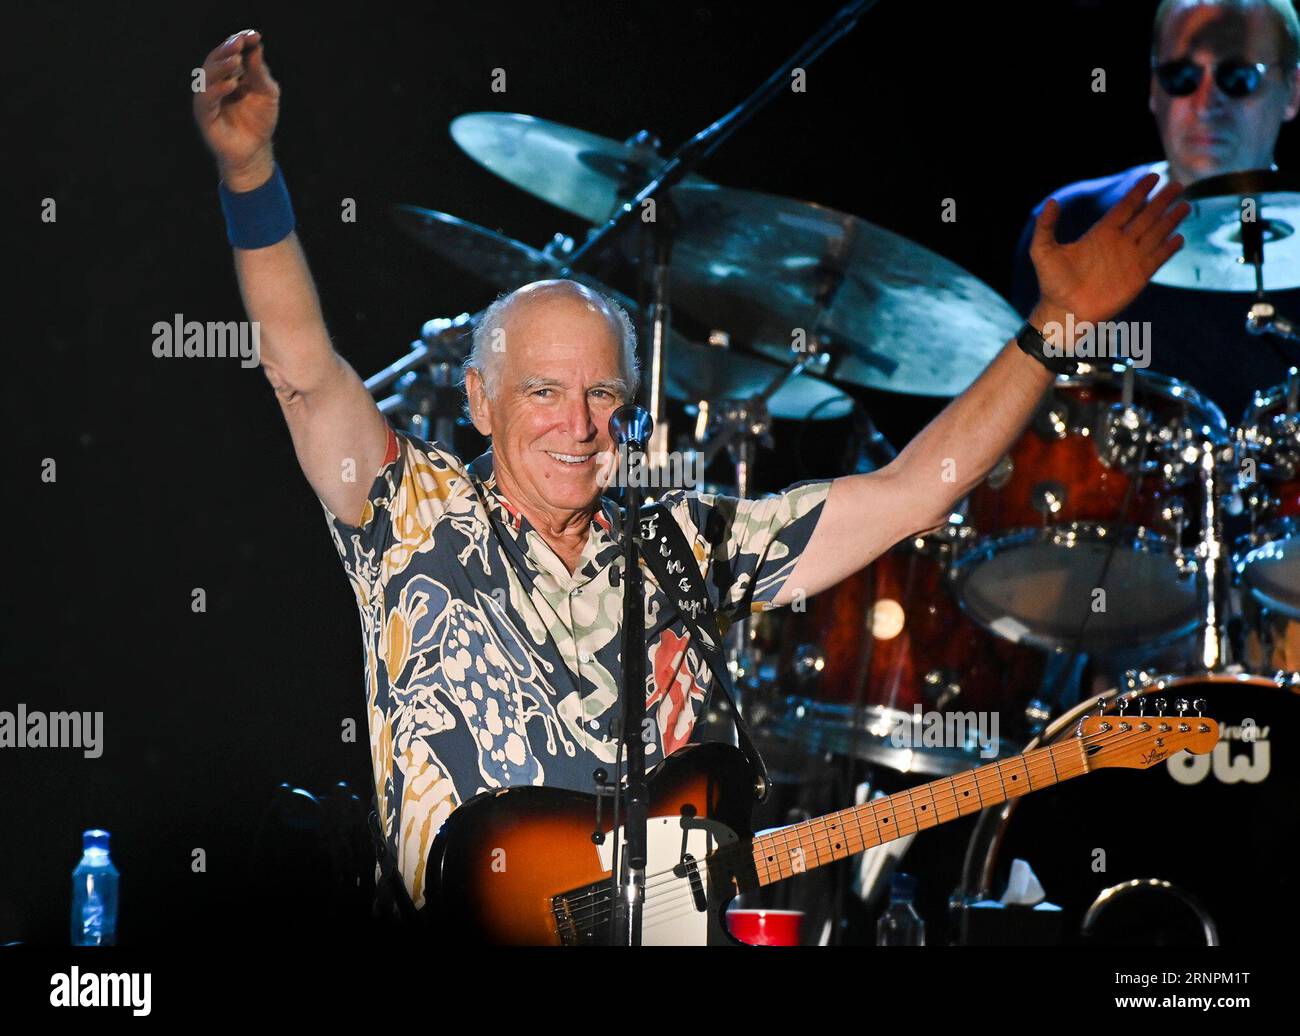 https://c8.alamy.com/comp/2RNPM1T/file-jimmy-buffett-thanks-the-capacity-crowd-at-the-coffee-butler-amphitheater-on-feb-9-2023-during-a-string-of-four-shows-in-key-west-fla-buffett-who-popularized-beach-bum-soft-rock-with-the-escapist-caribbean-flavored-song-margaritaville-and-turned-that-celebration-of-loafing-into-an-empire-of-restaurants-resorts-and-frozen-concoctions-has-died-friday-sept-1-2023-rob-oneal-the-key-west-citizen-via-ap-2RNPM1T.jpg